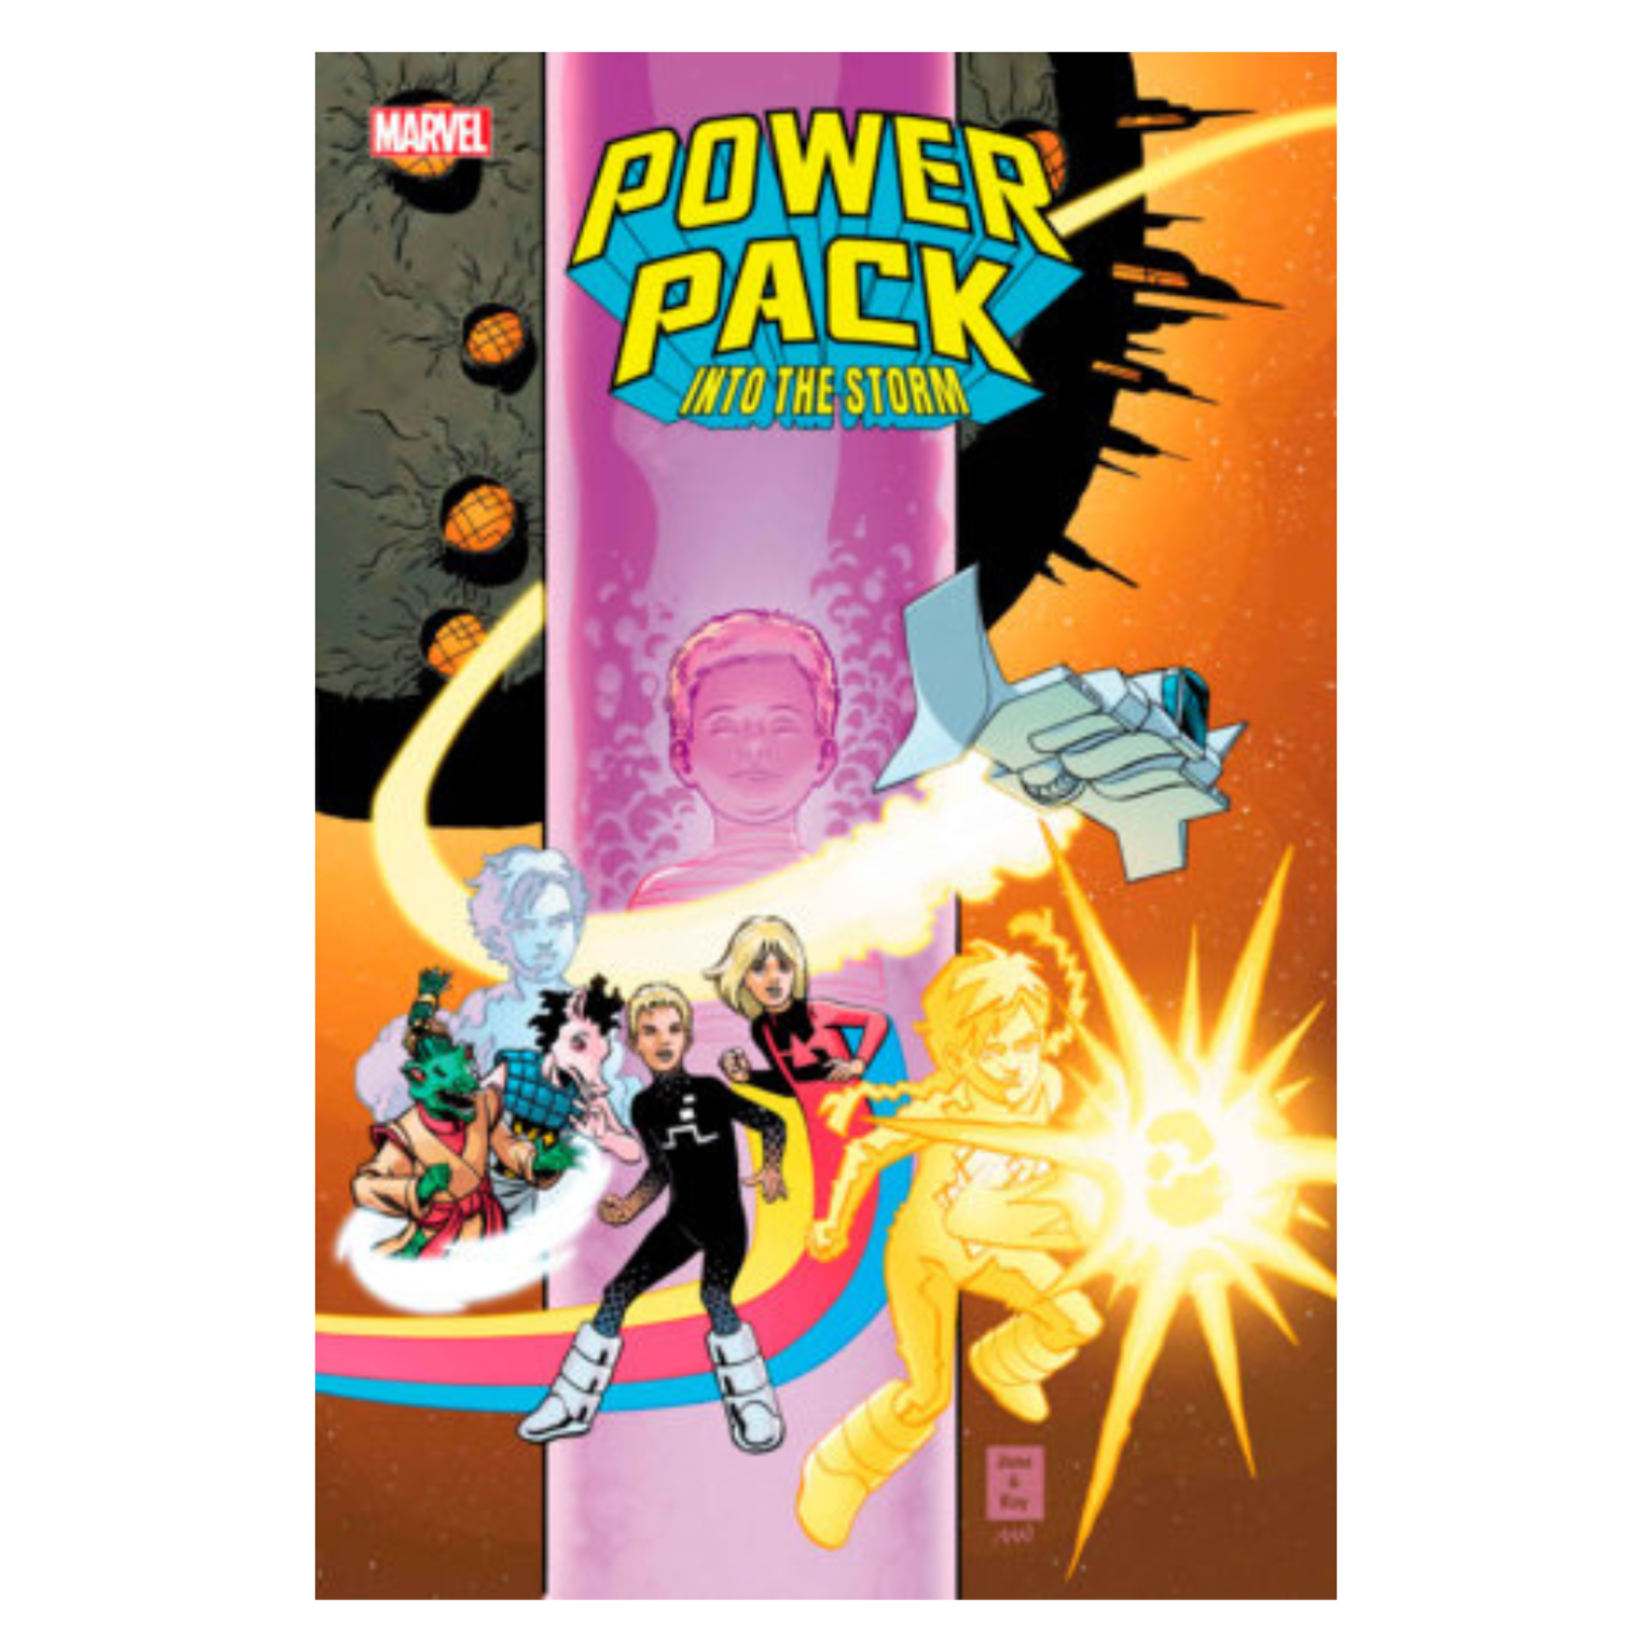 Marvel Comics Power Pack Into The Storm #4